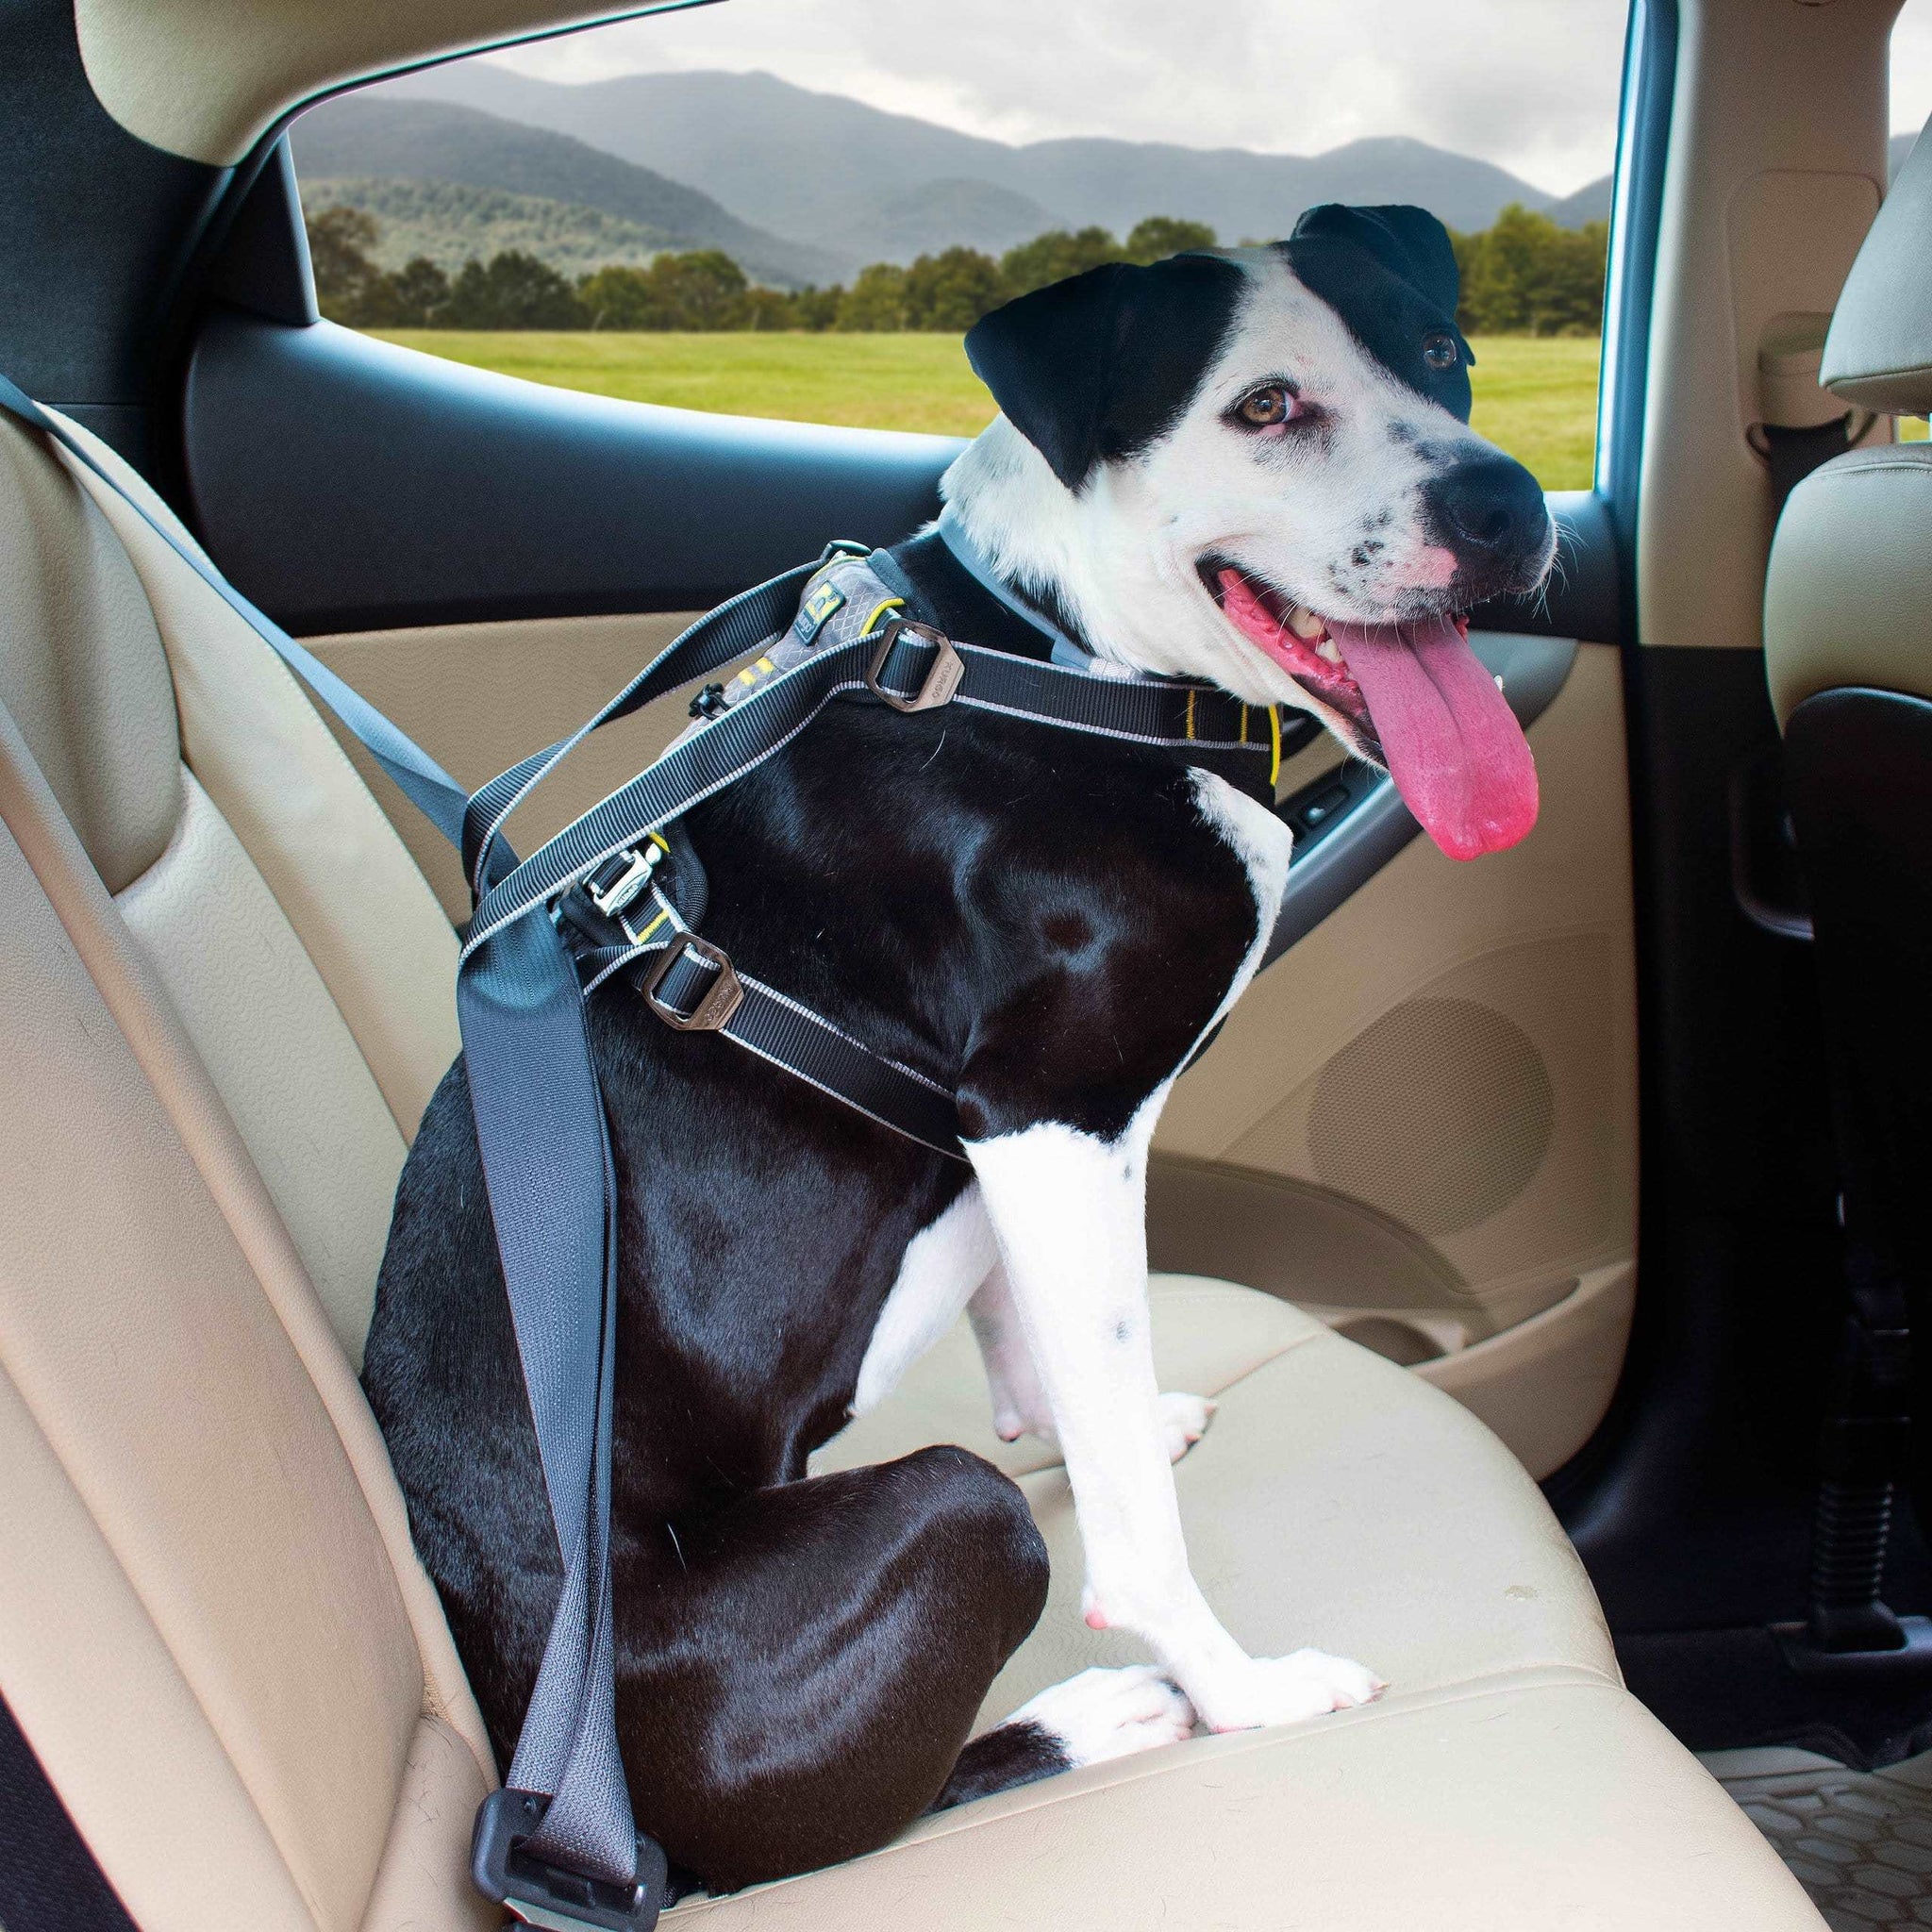 A useful side view of the Dog car travel safety harness 4 point adjustment system that integrates into your vehicle’s seatbelt system.